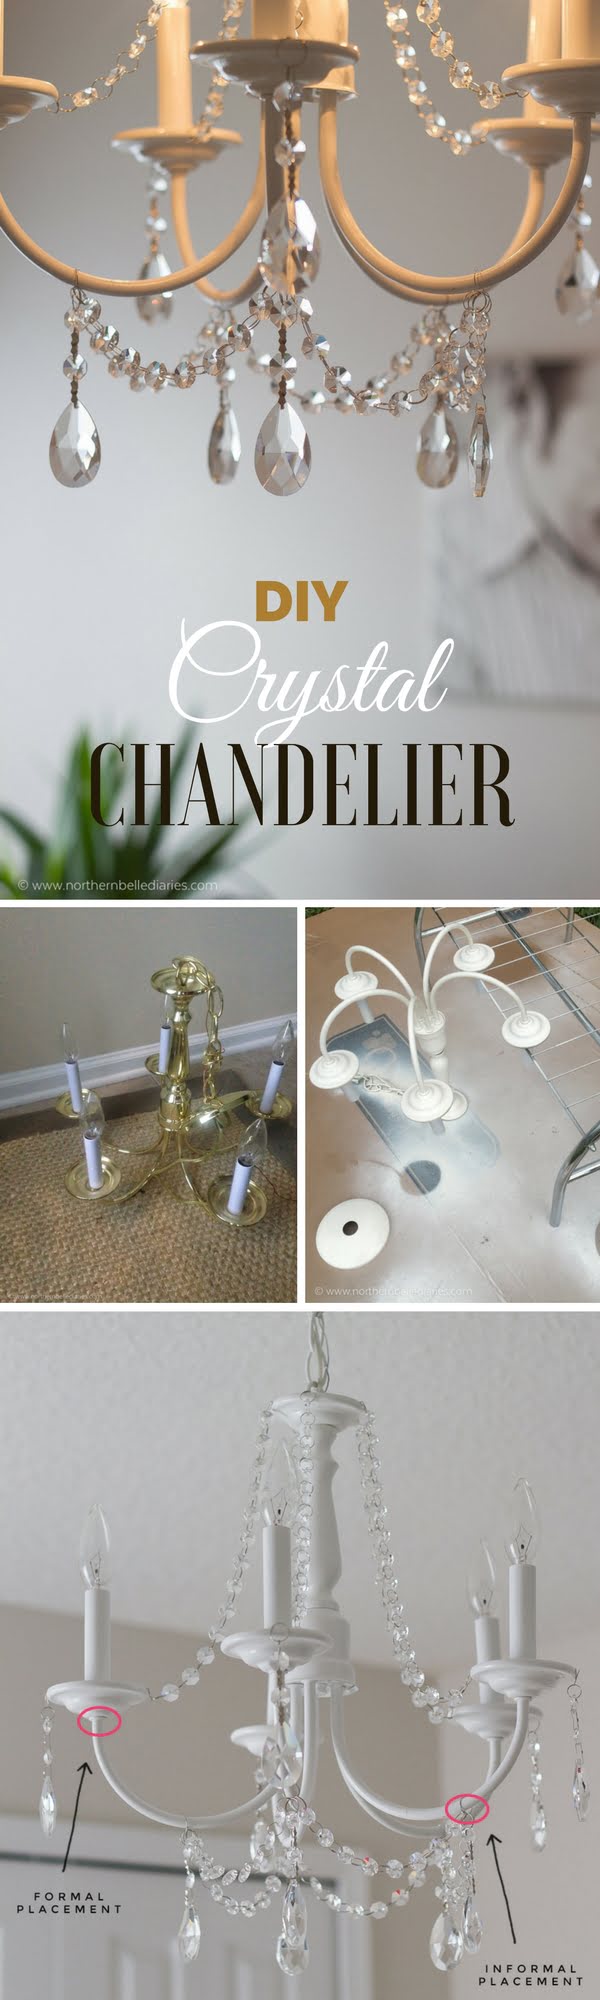 Check out how to make an easy DIY crystal chandelier